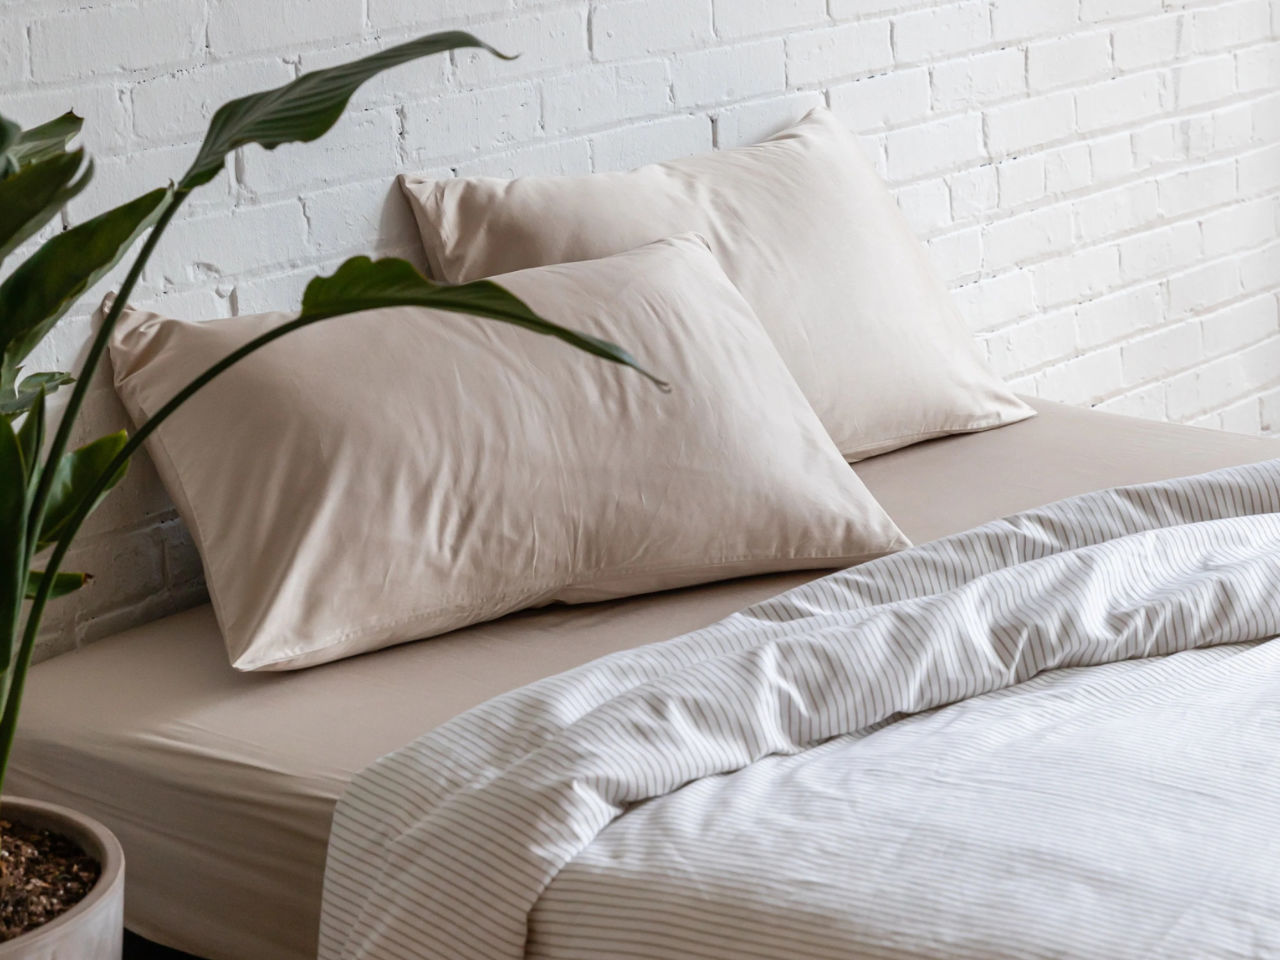 A bed made with Kotn sheets against a white exposed brick wall with a houseplant in the foreground.